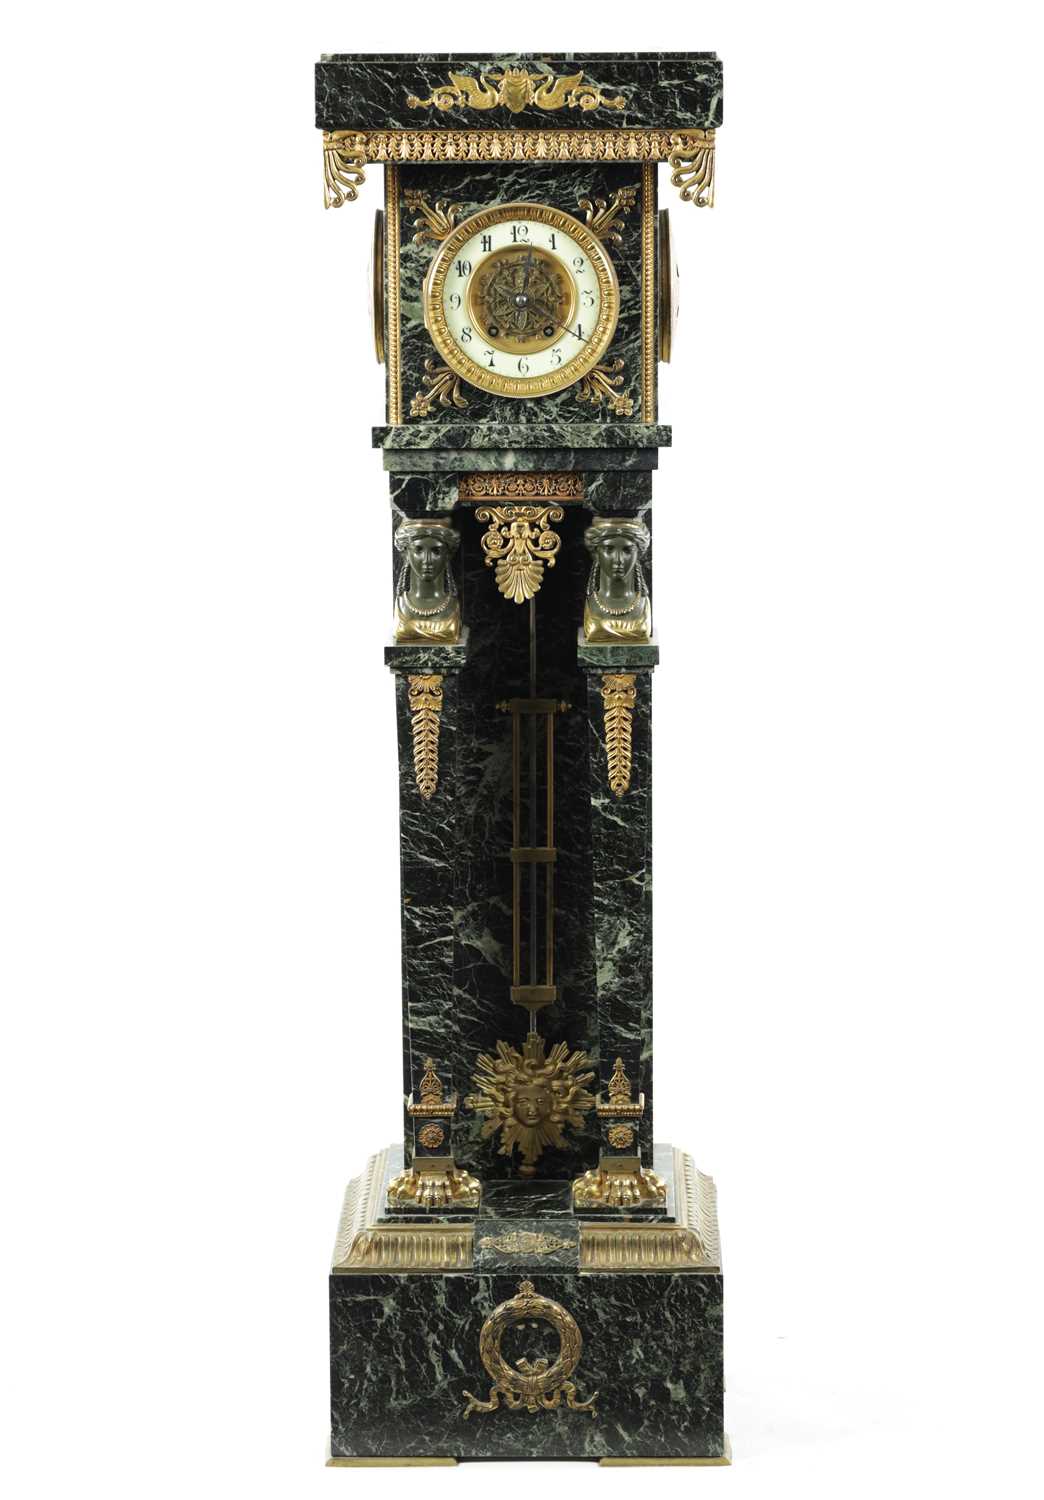 Lot 634 - A LATE 19TH CENTURY FRENCH EMPIRE STYLE ORMOLU MOUNTED MARBLE PEDESTAL CLOCK